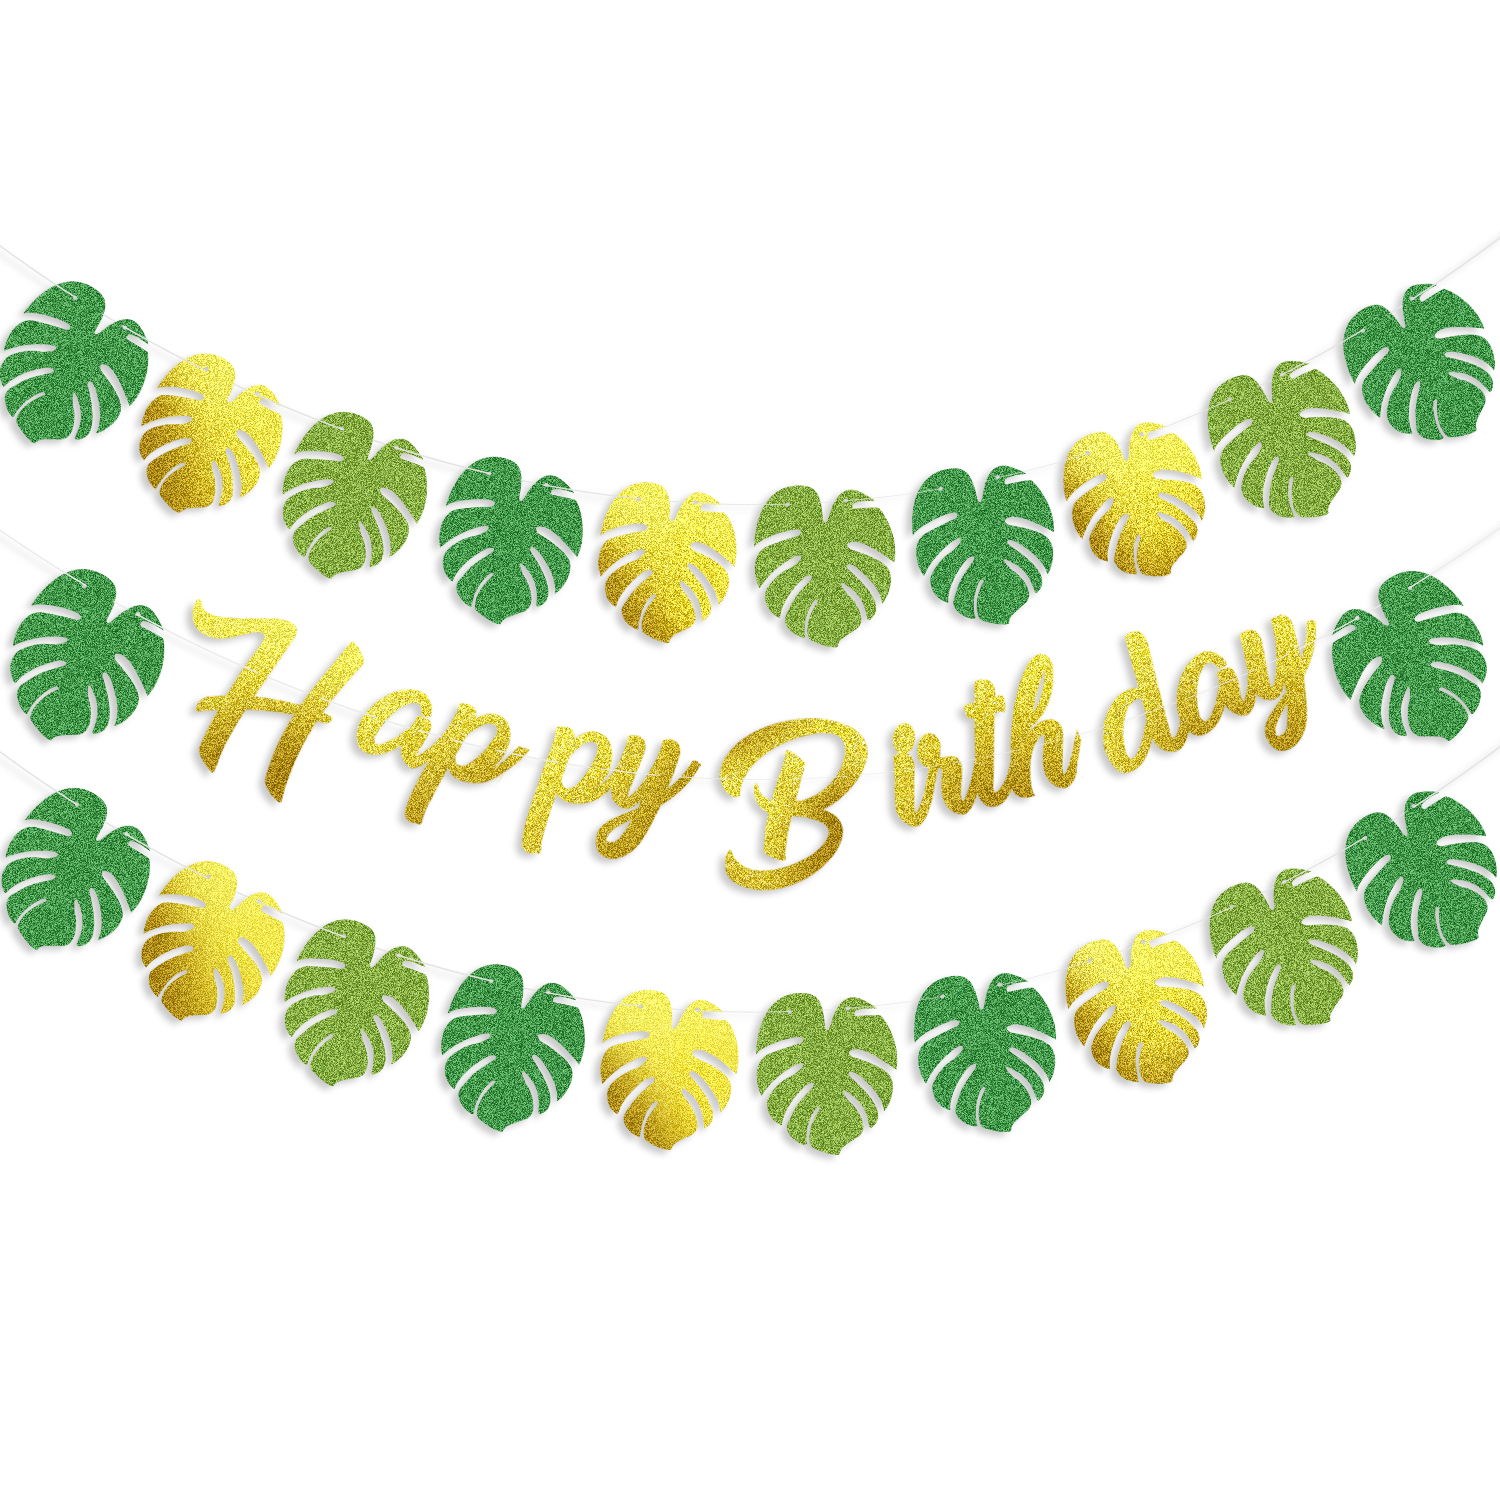 Tropical Birthday Party Decorations - 3 Set Hawaiian Happy Birthday Banners, Gold and Green Glittery Tropical Palm Leaf Garland, Summer Jungle Beach Luau Hawaiian Birthday Party Decorations - image 1 of 8